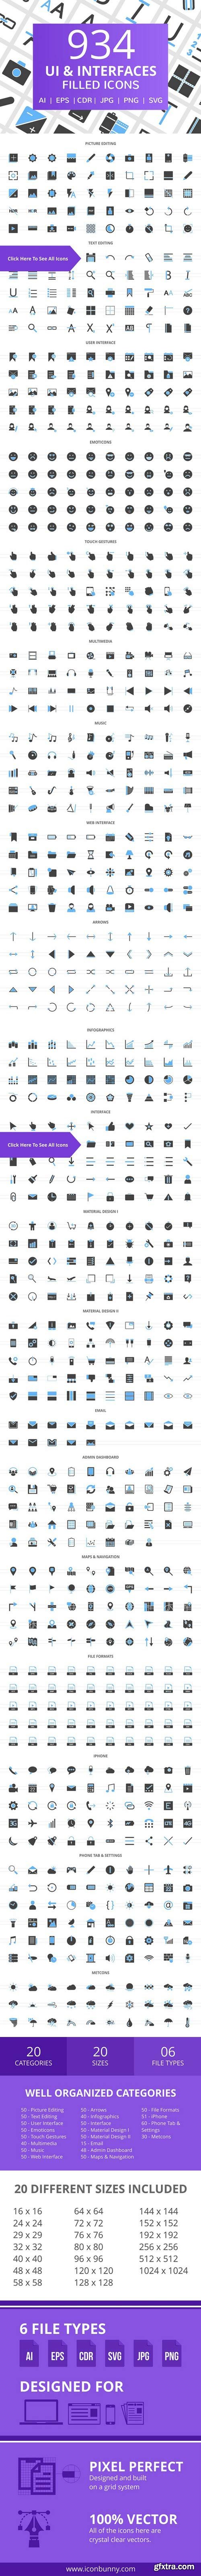 CM - 934 UI & Interfaces Filled Icons 2402731